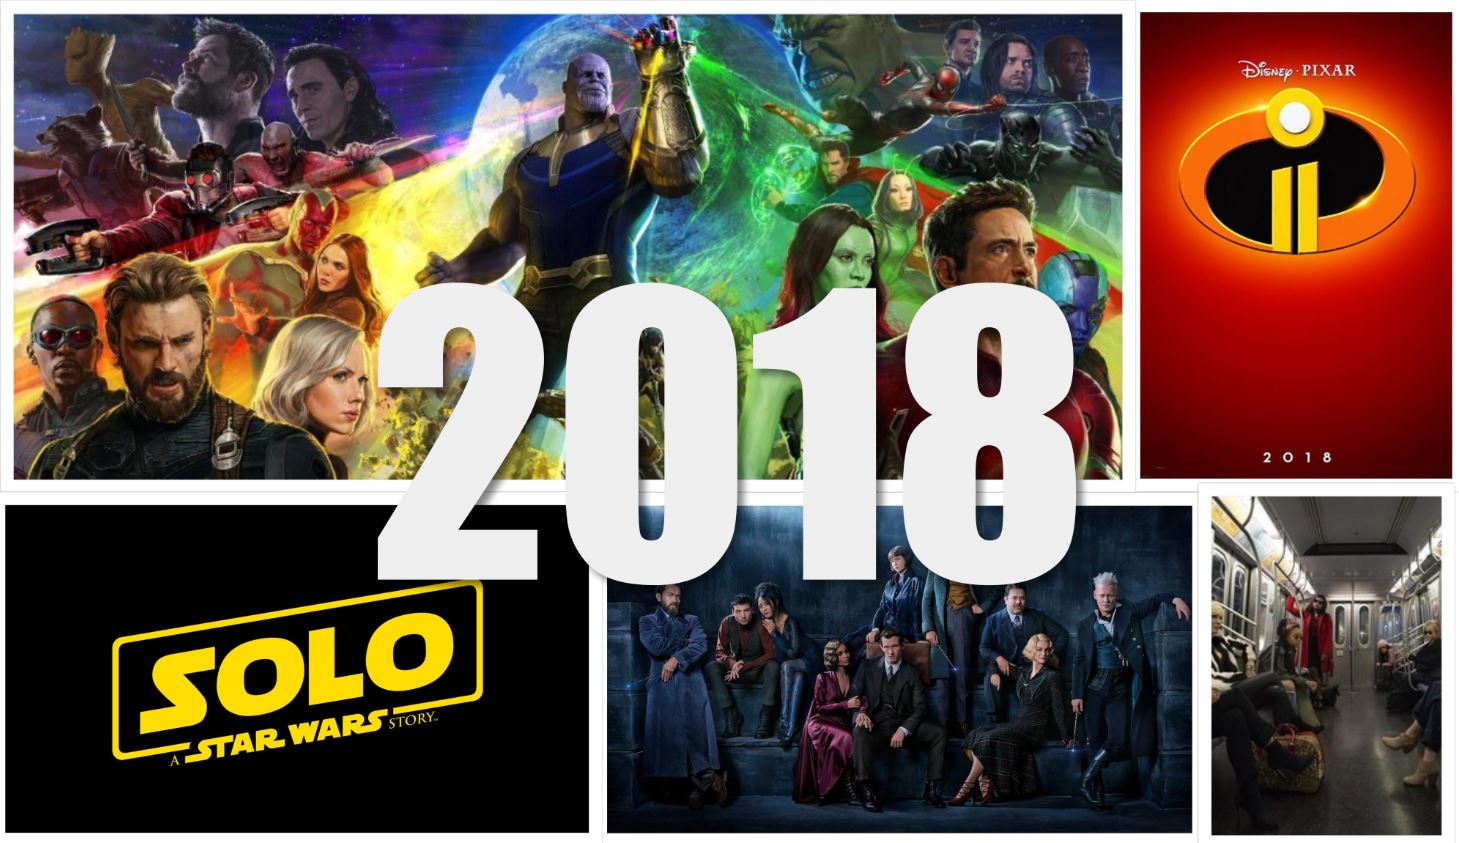 Hollywood: Top 10 movies to look out for in 20181459 x 843